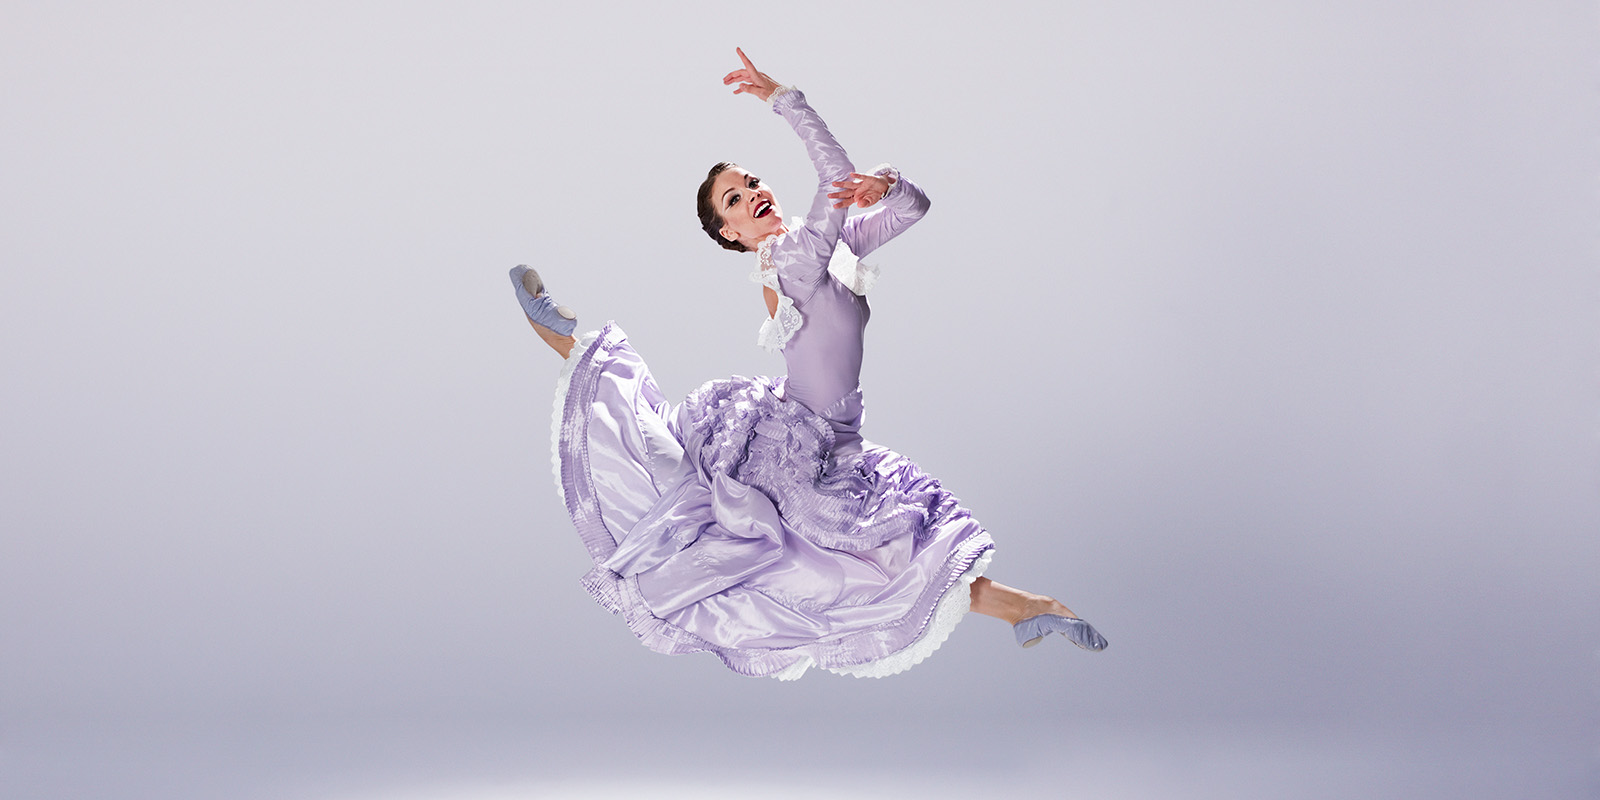 A woman in a purple dress leaps in the air